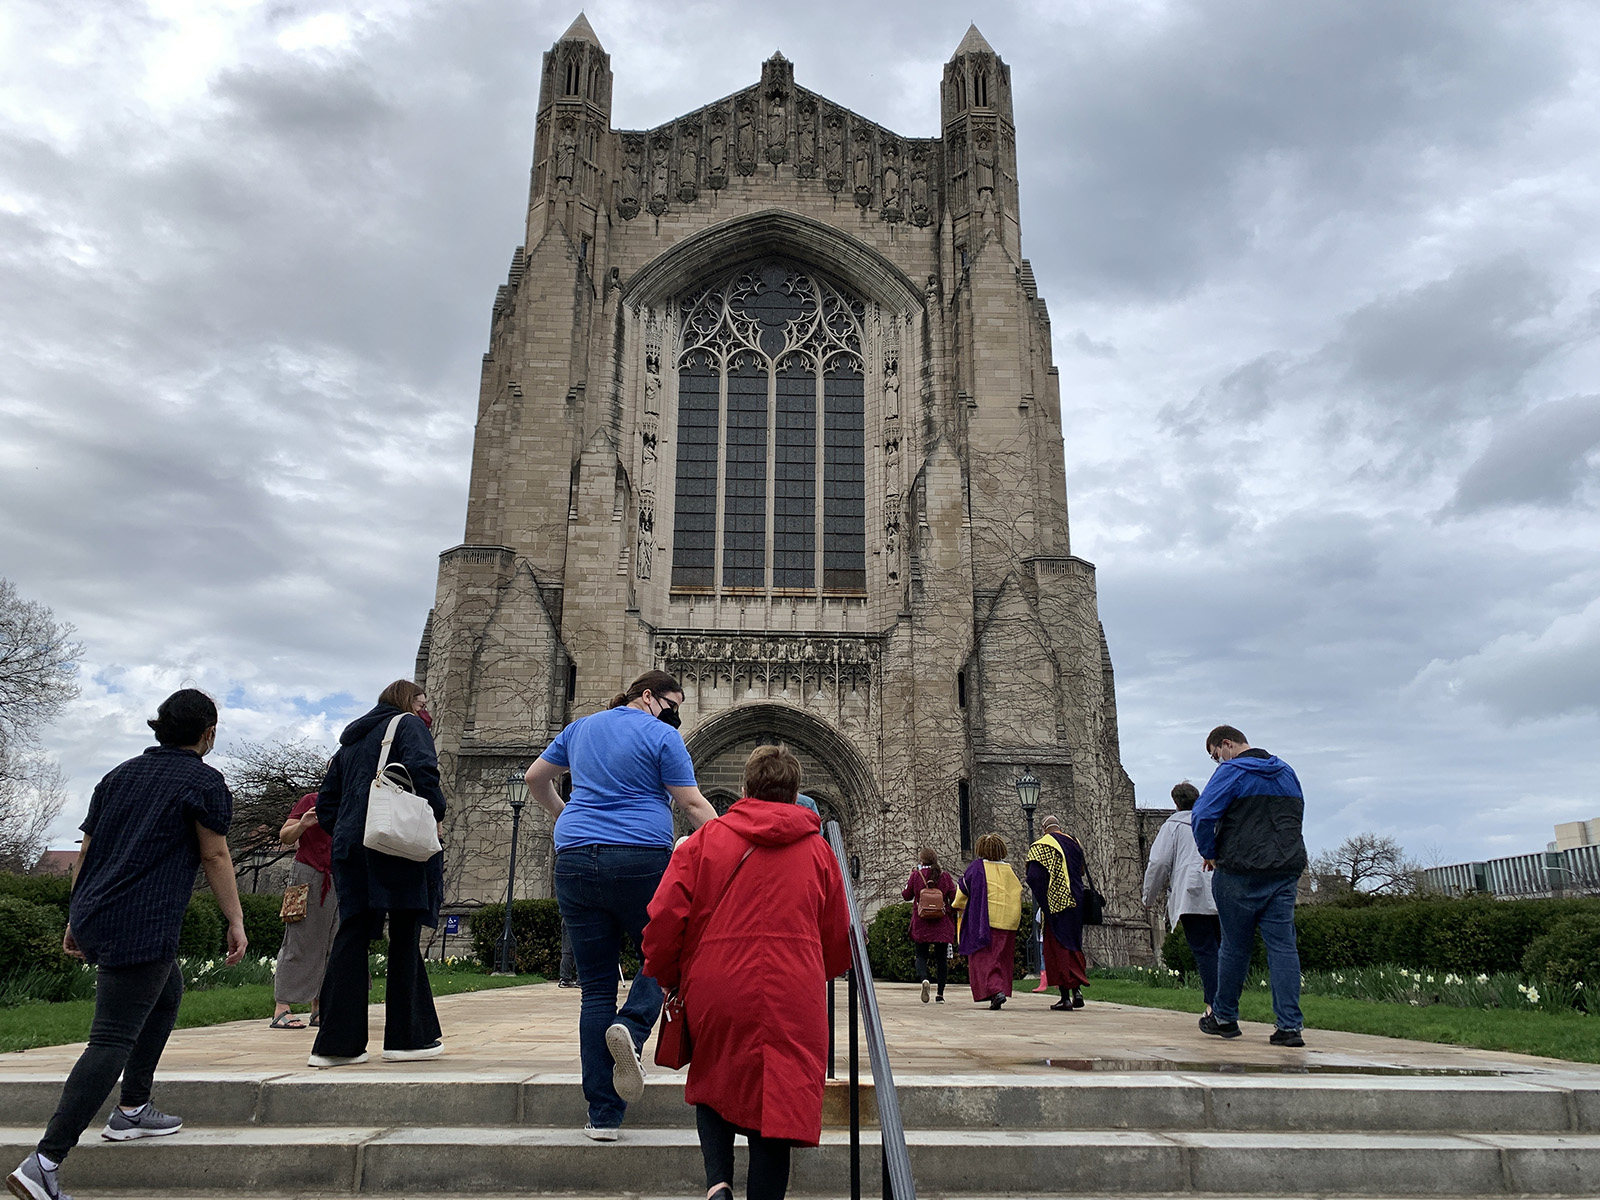 Chicago Interfaith Trolley Tour participants stop at the University of Chicago's Rockefeller Memorial Chapel on Sunday, April 24, 2022. RNS Photo by Bob Smietana